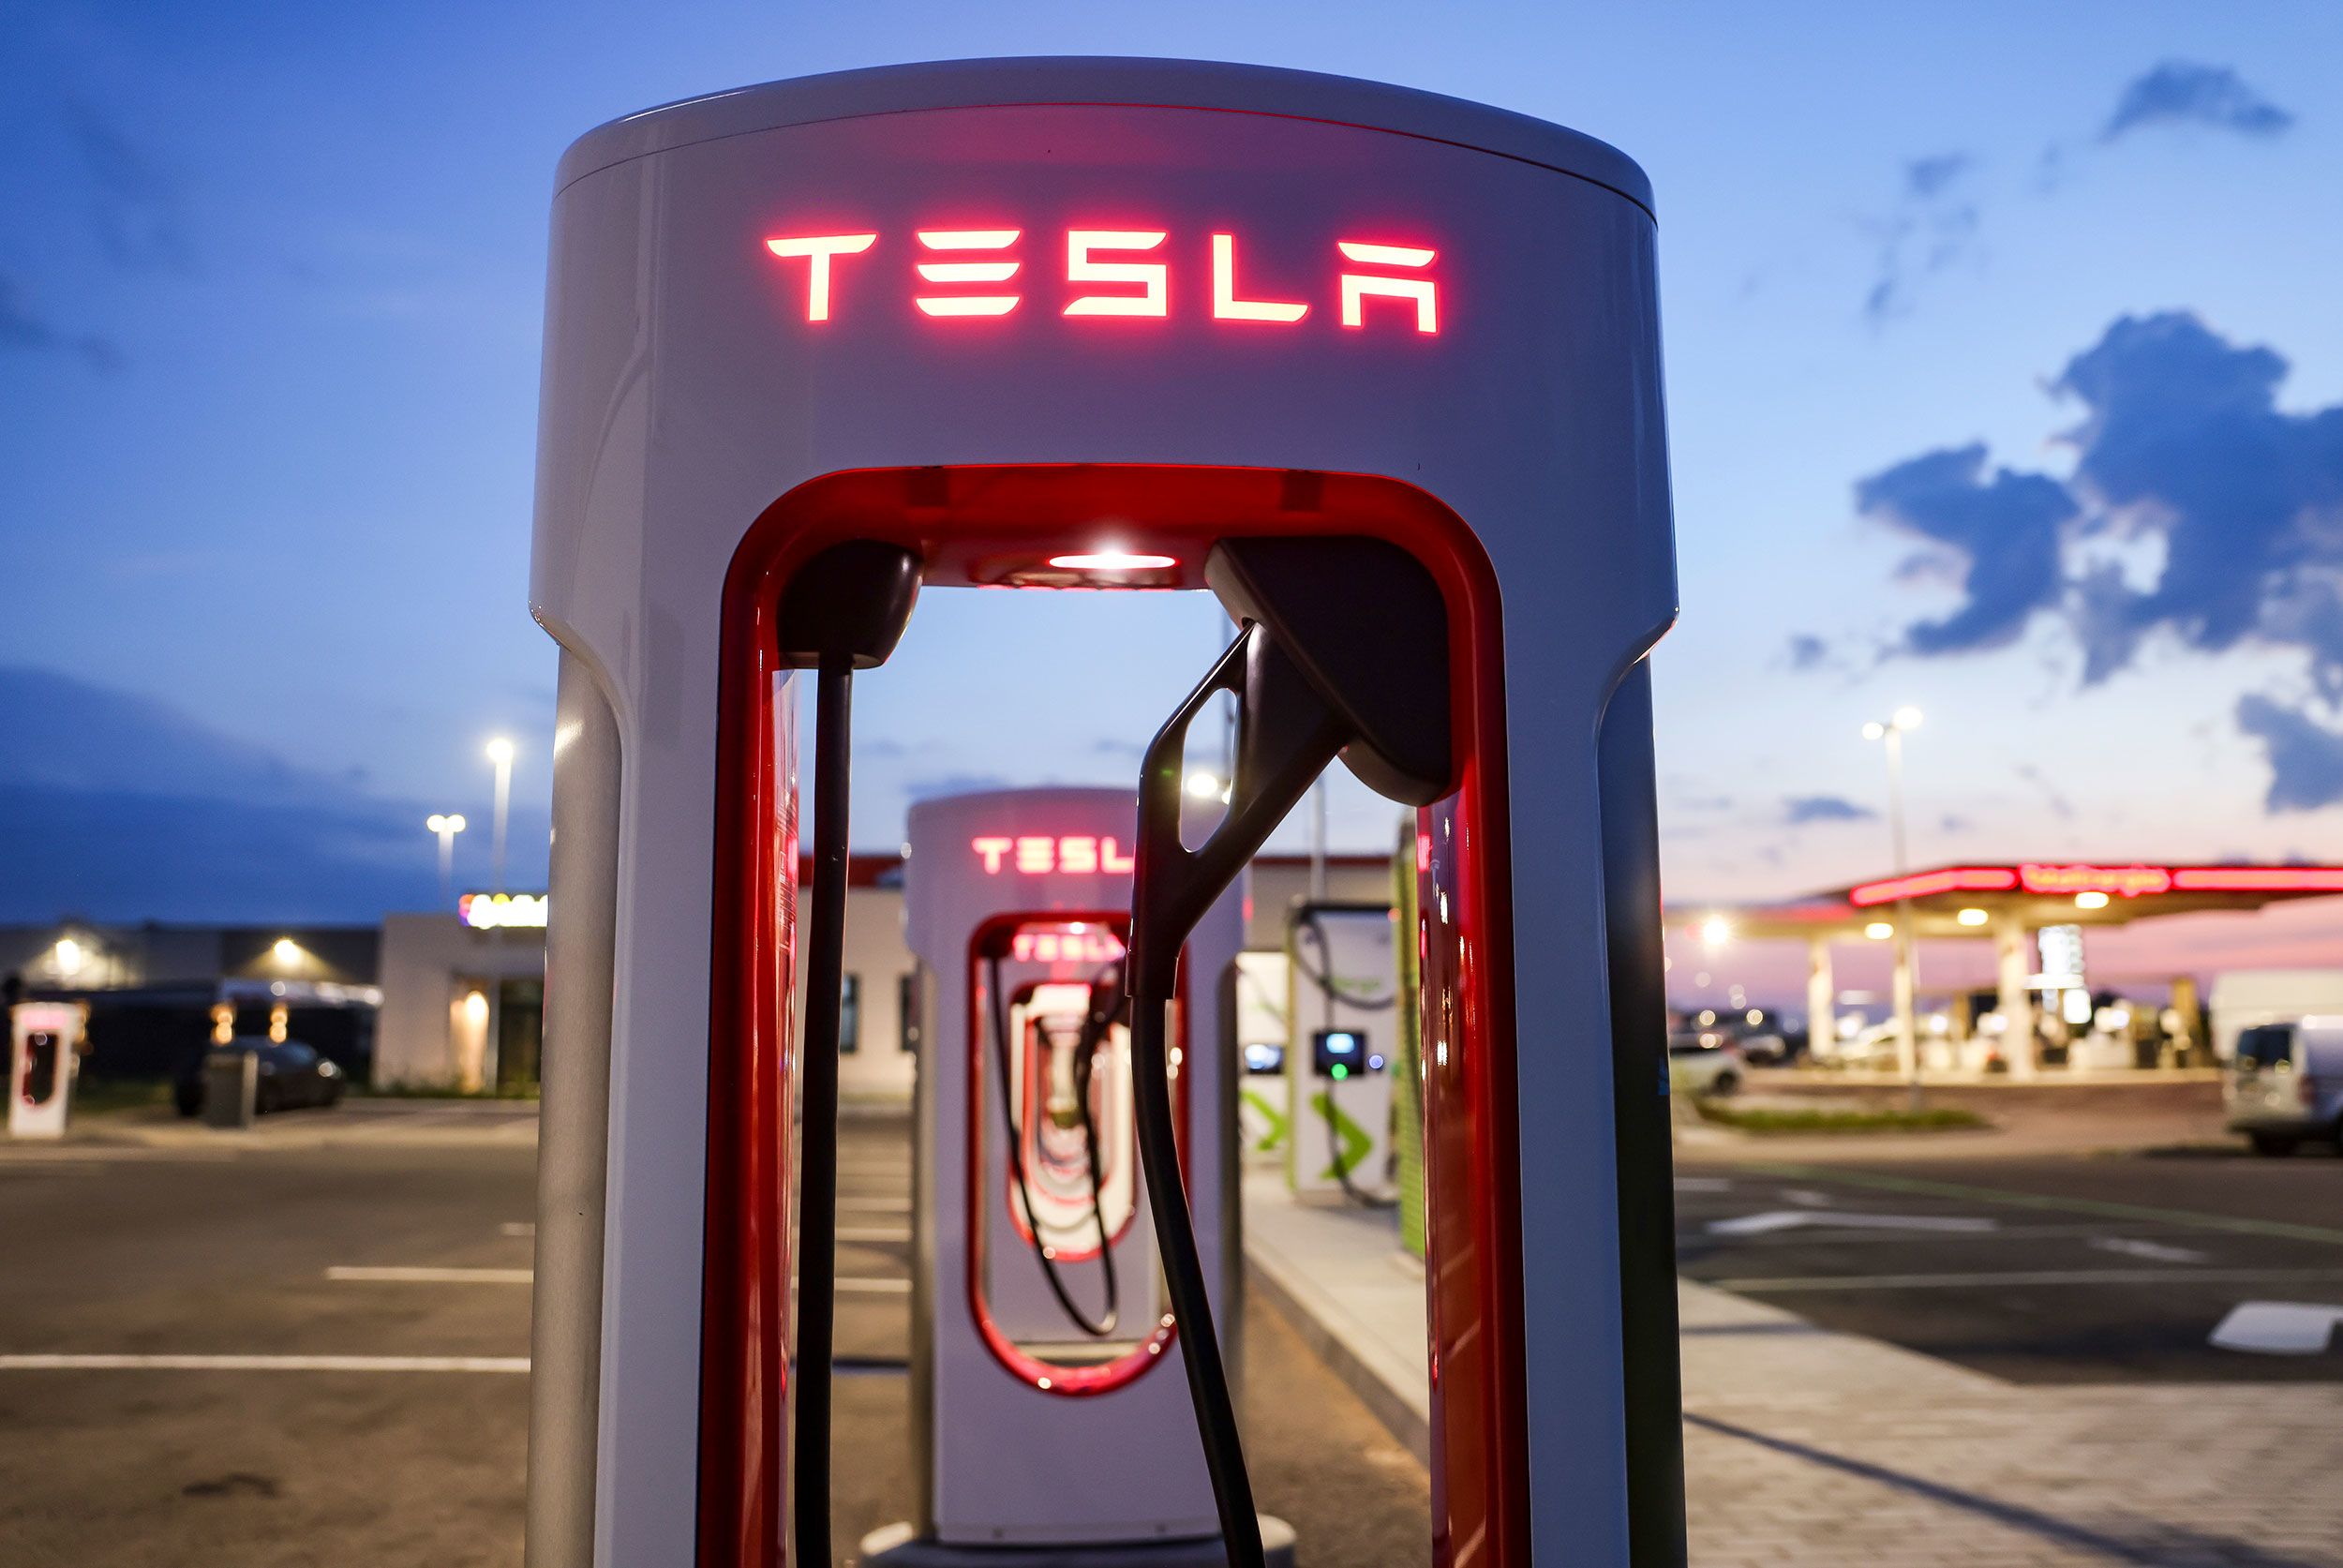 Tesla officially opens its charging network to non-Tesla cars